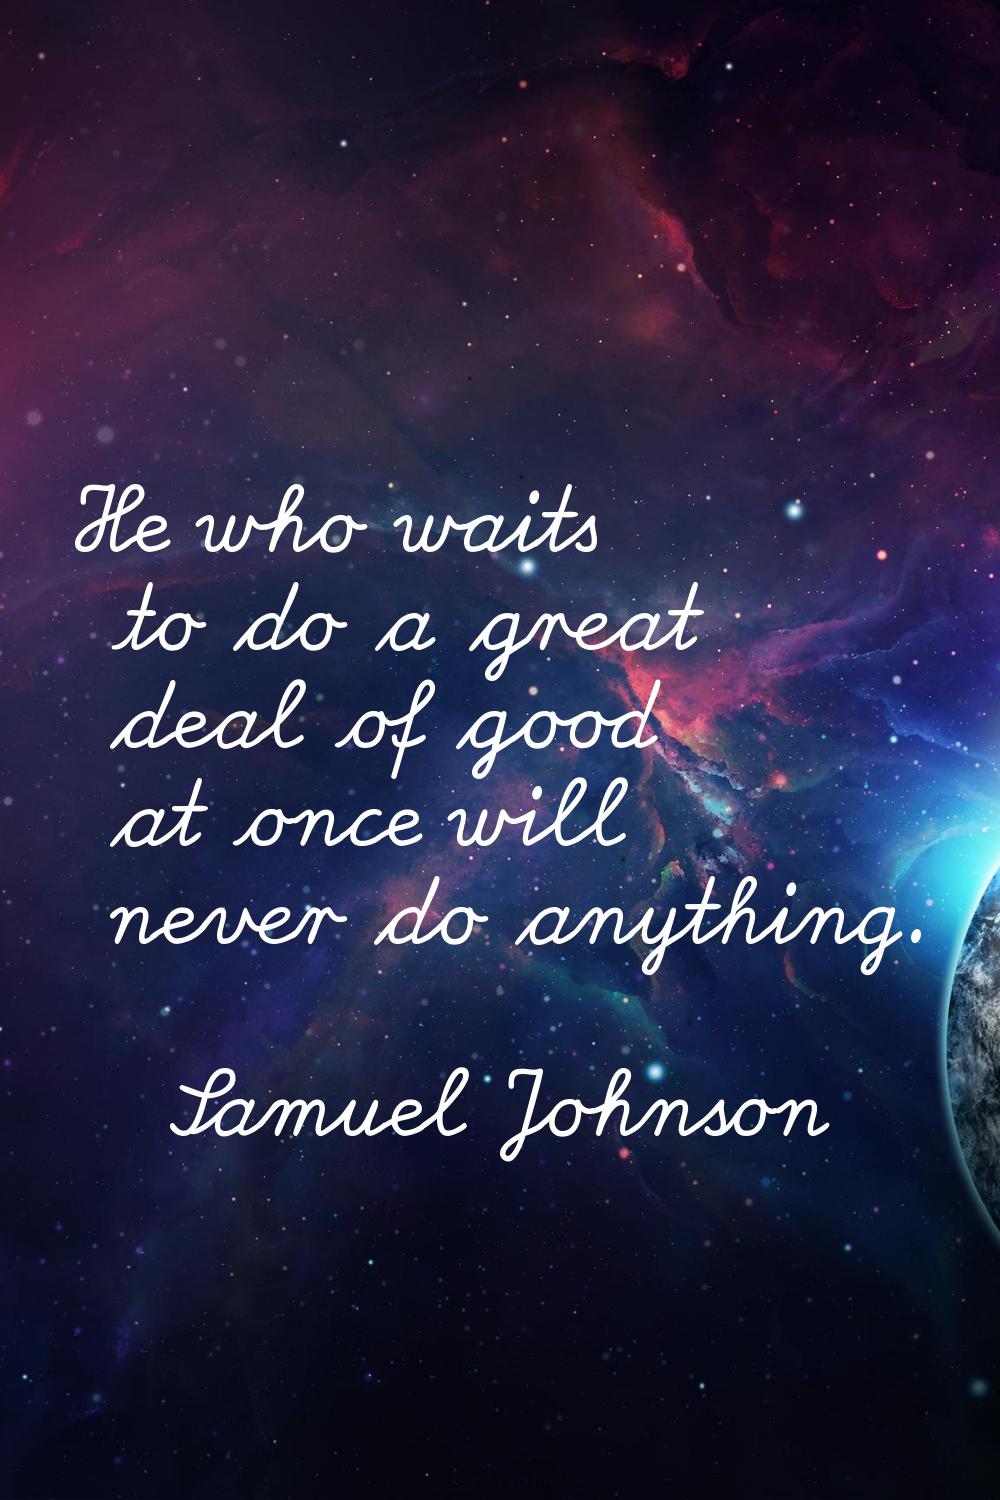 He who waits to do a great deal of good at once will never do anything.